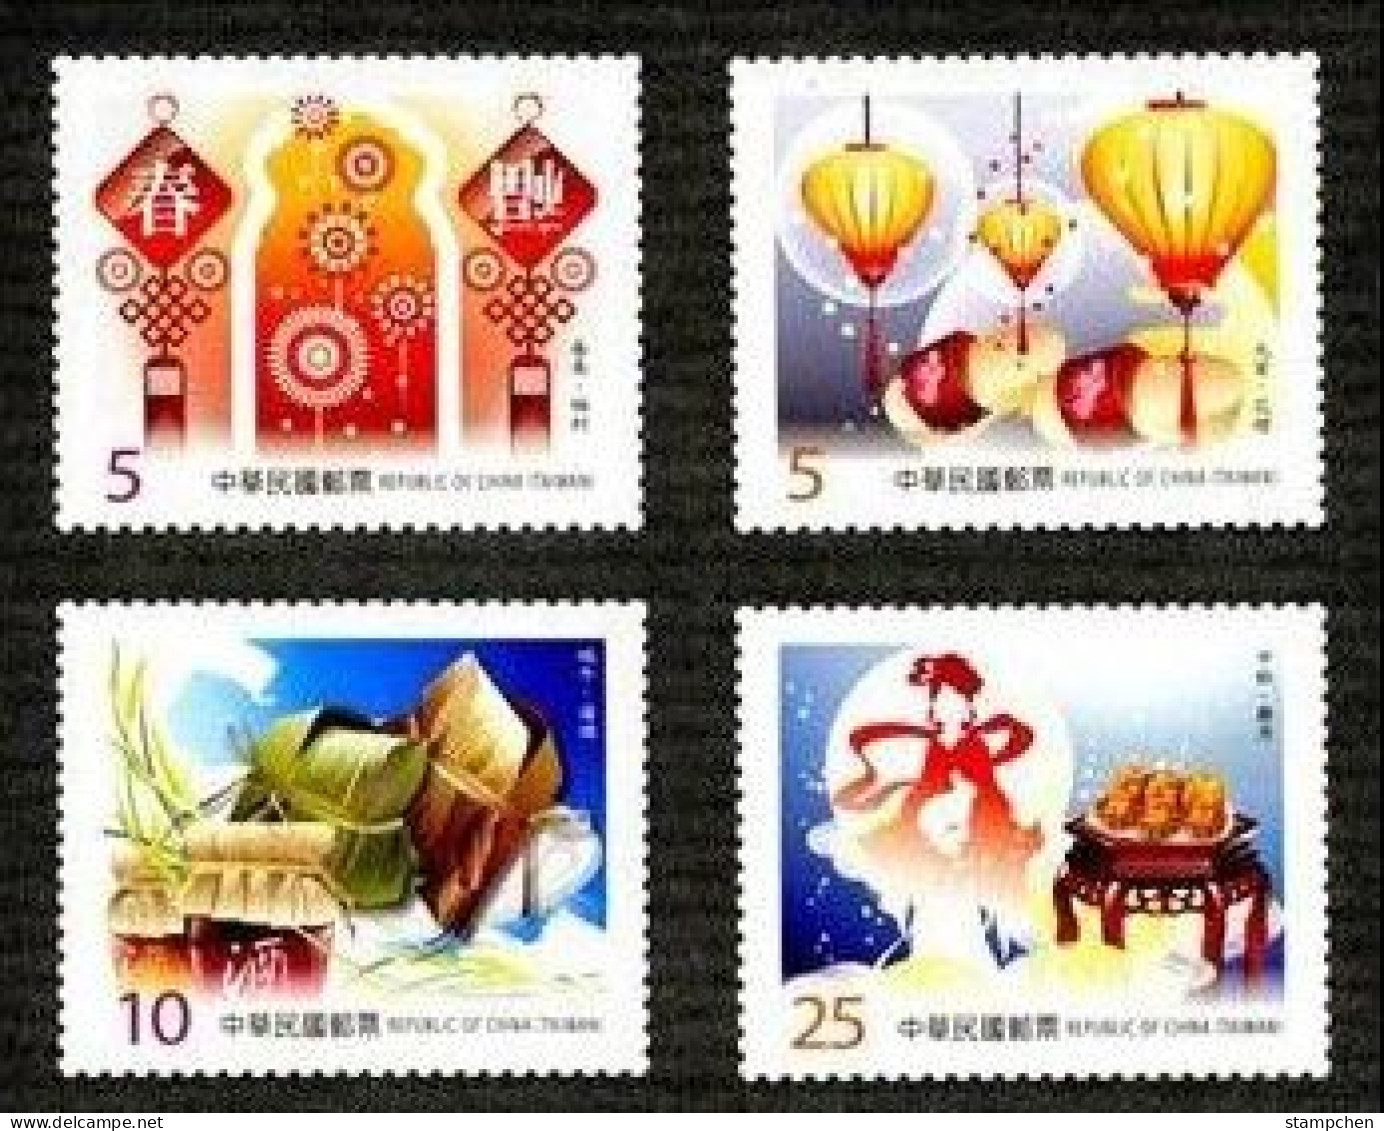 Taiwan 2012 Traditional Festival Stamps New Year Lantern Dragon Boat Moon Firework Rice Wine Insect Hare Autumn Cake - Ungebraucht